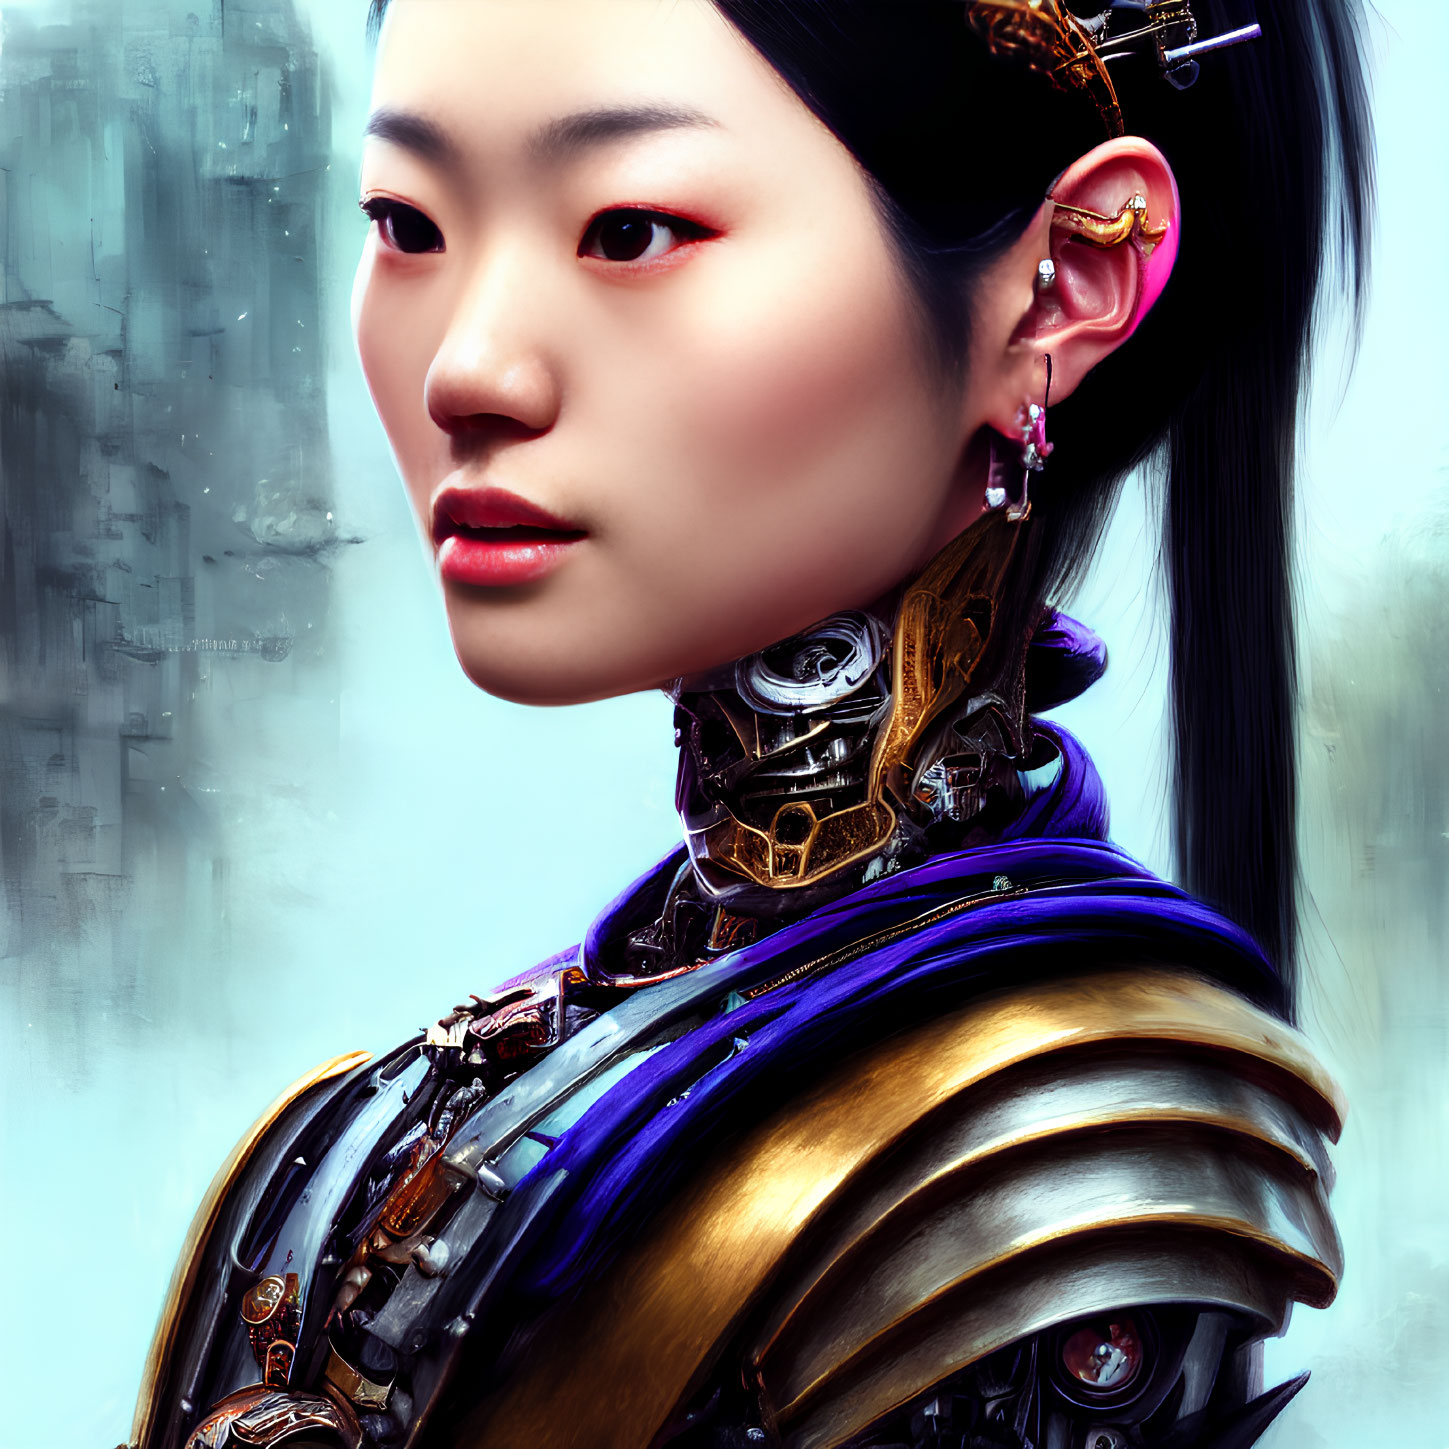 Detailed Female Cyborg Portrait with Mechanical Neck Components and Asian Earrings